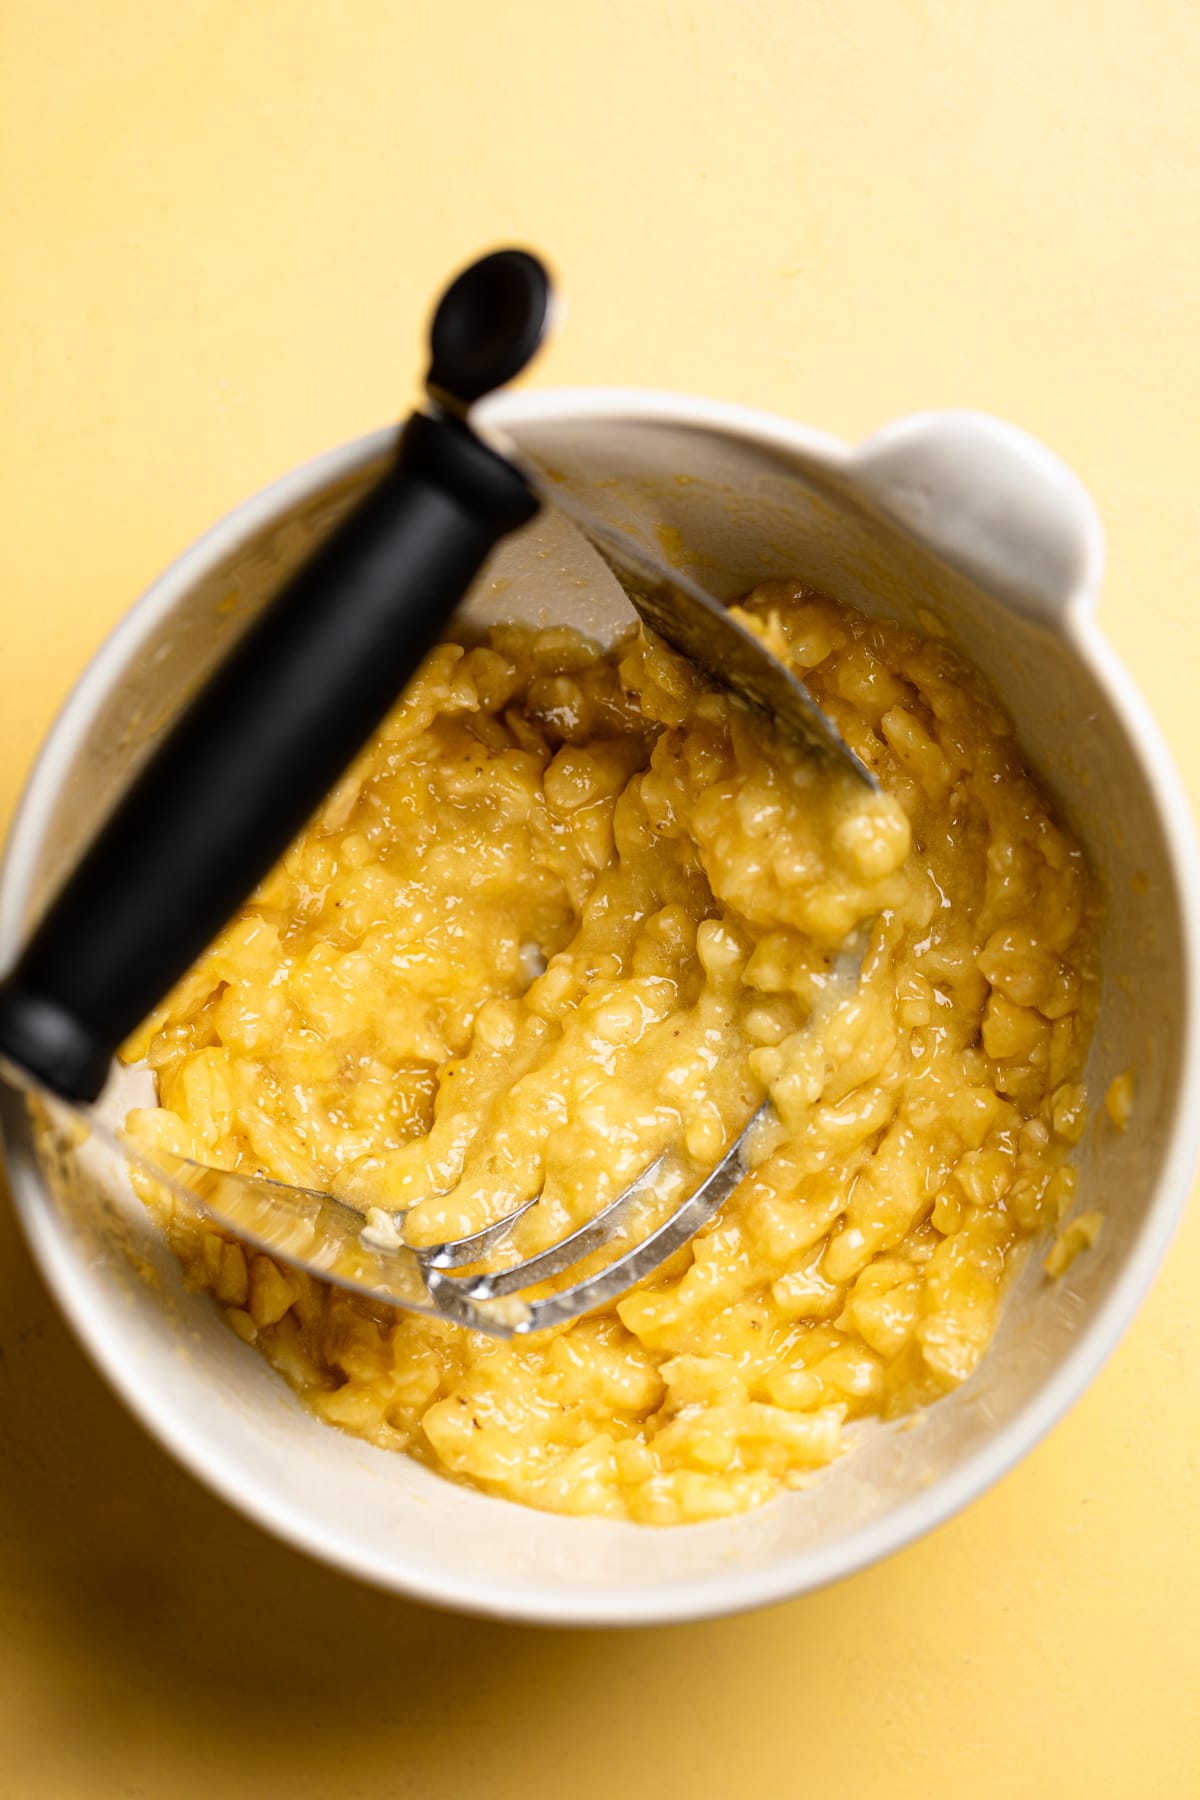 Pastry blender in a bowl of mashed bananas